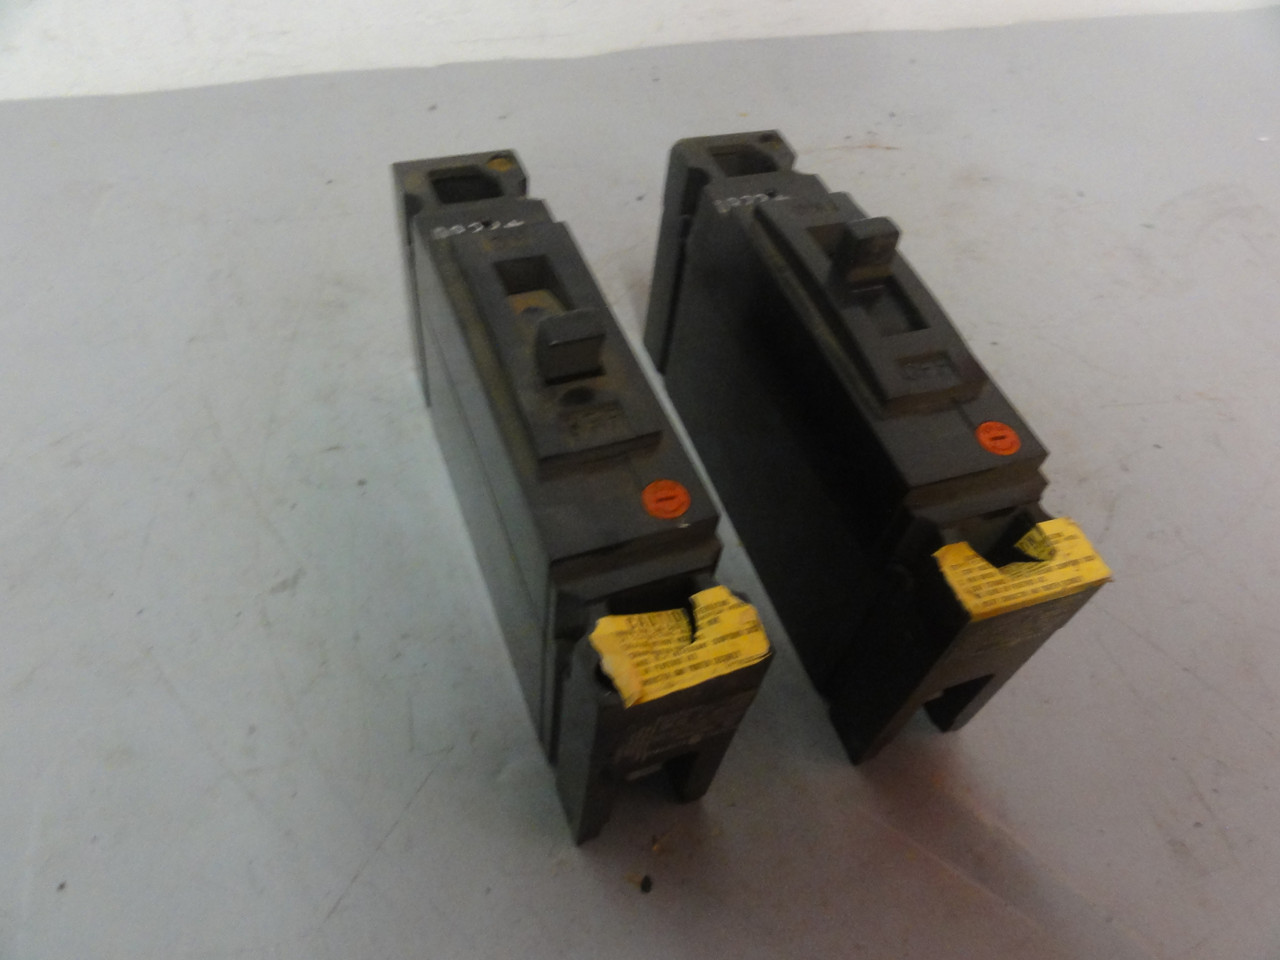 GE TED113020 Circuit Breaker 277VAC 20A 125VDC 1 Pole (Lot of 2)